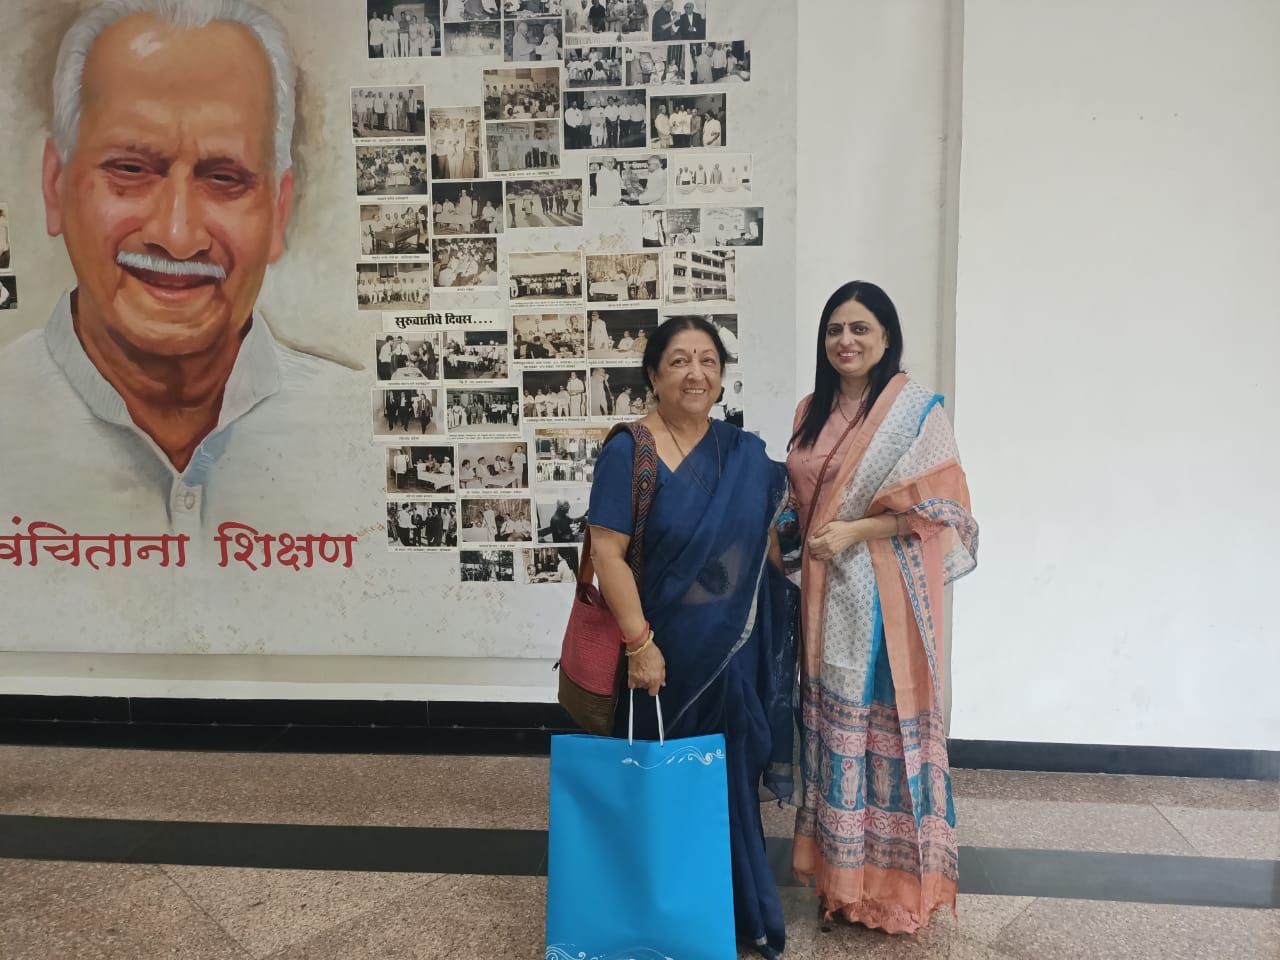 Visit to Vidyanjali School, Mumbai on 25 Feb 2020 for learning best practices.